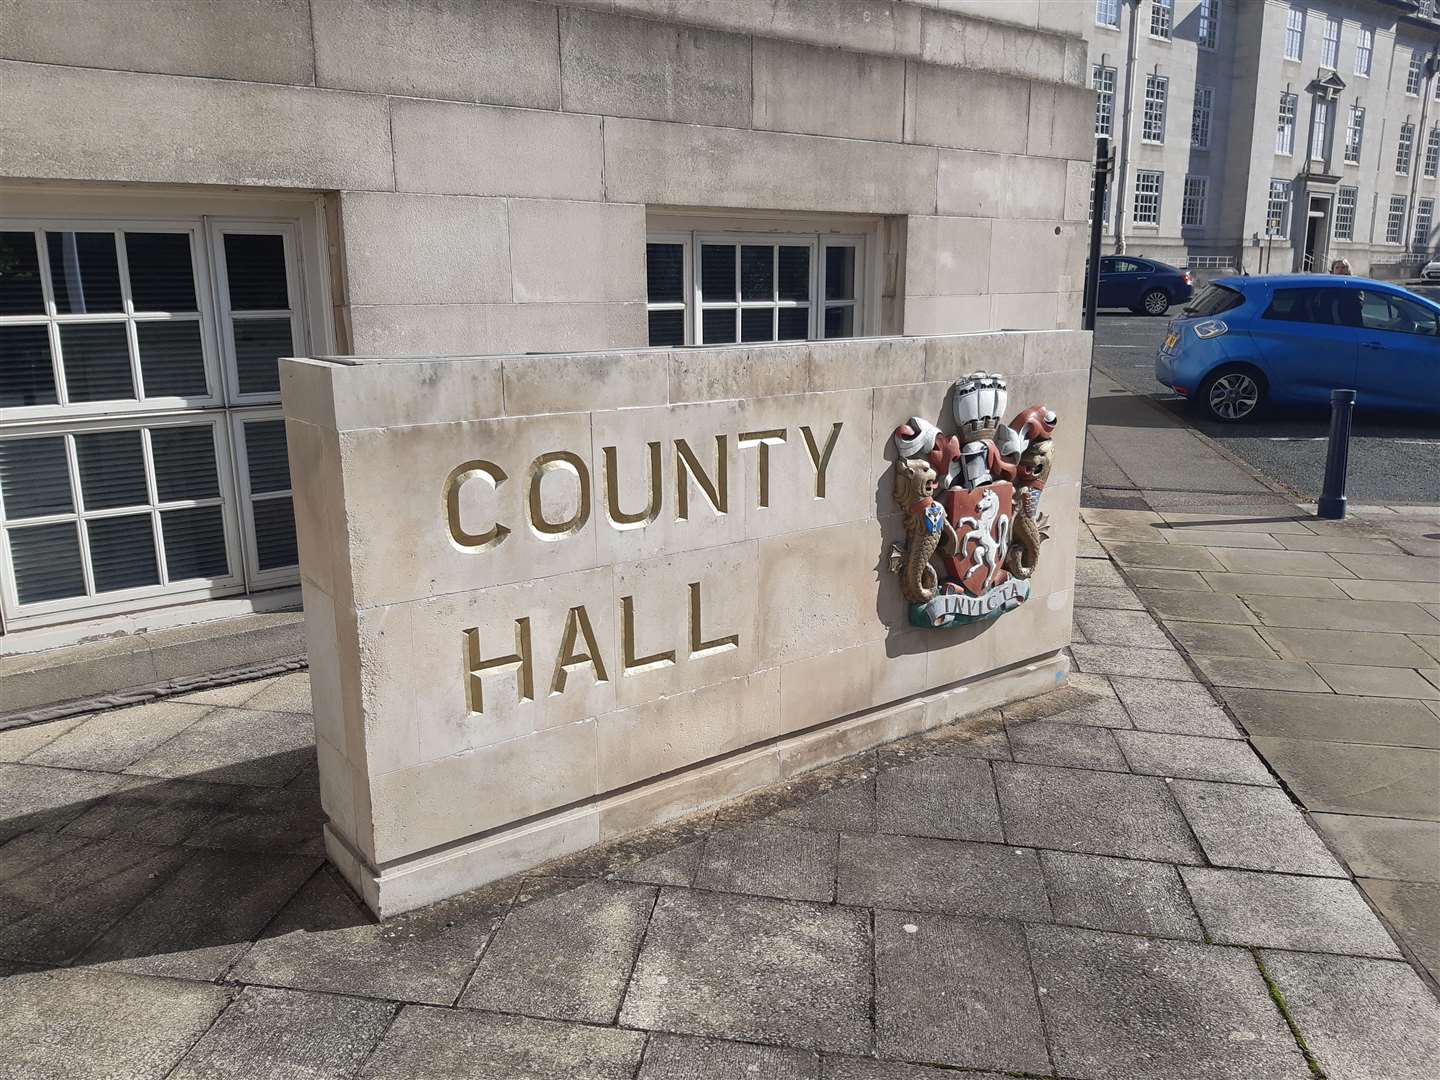 County Hall is the home of Kent County Council